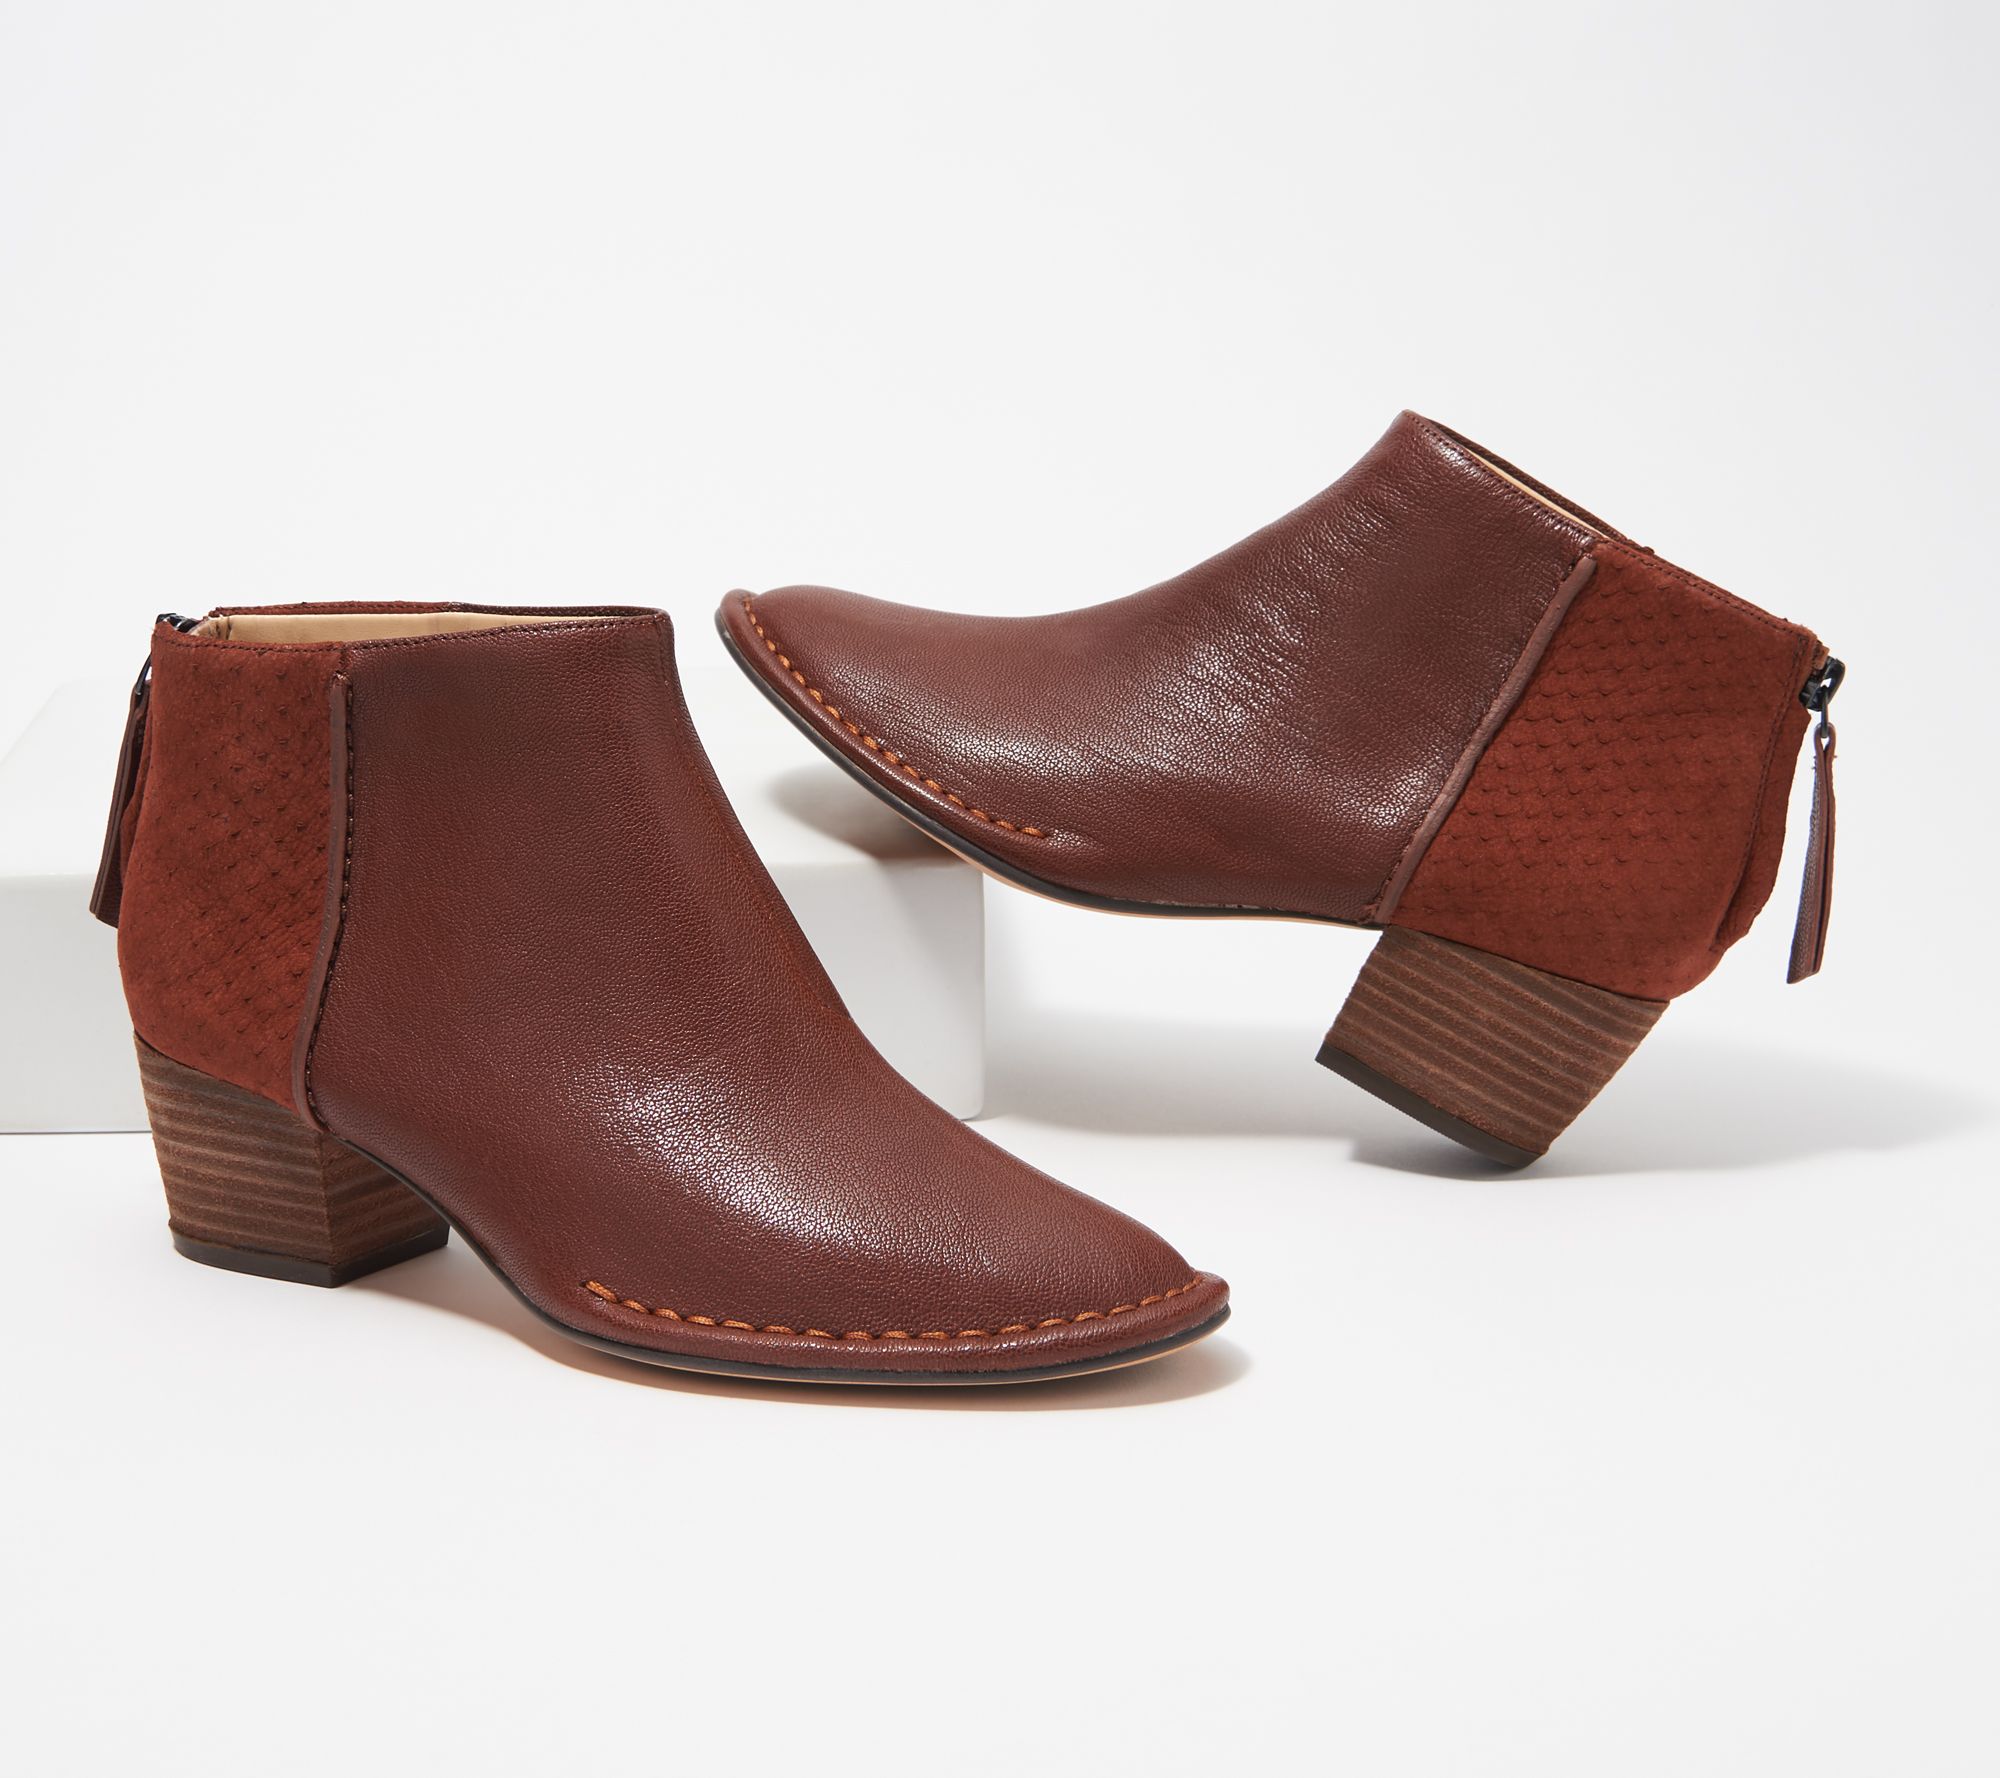 Clarks Leather Ankle - Ruby QVC.com